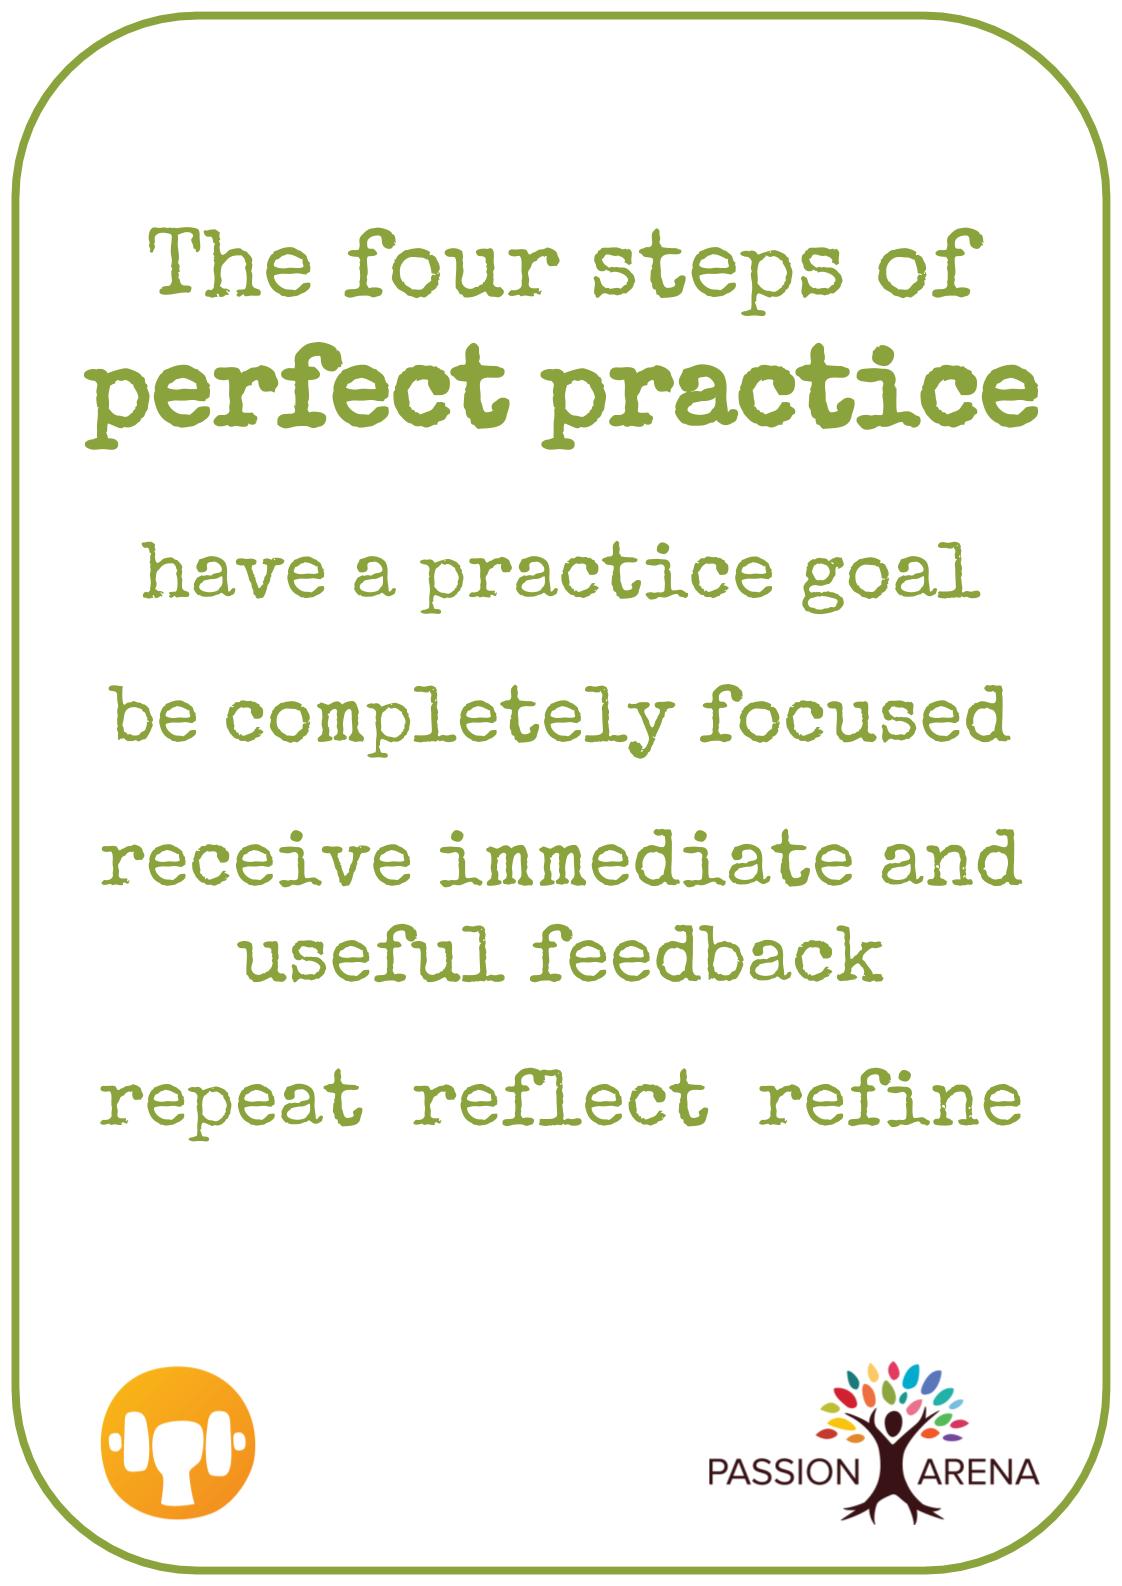 Intro-1-14. What exactly is perfect practice?